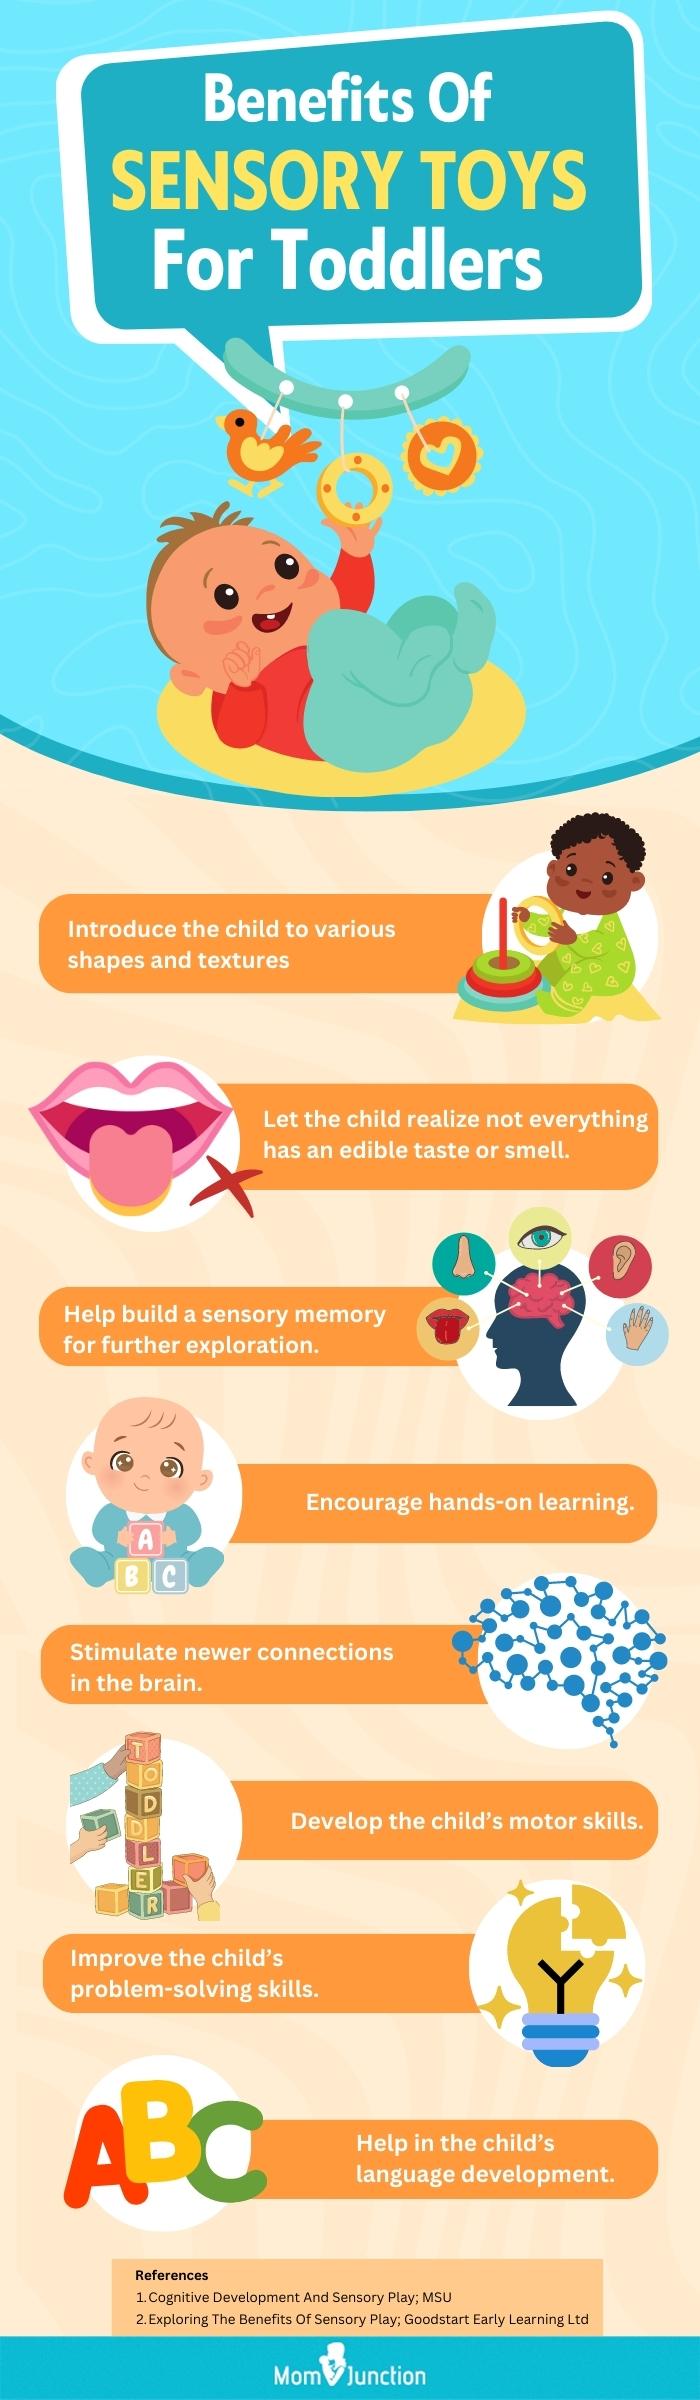 Benefits Of Sensory Toys For Toddlers (infographic)